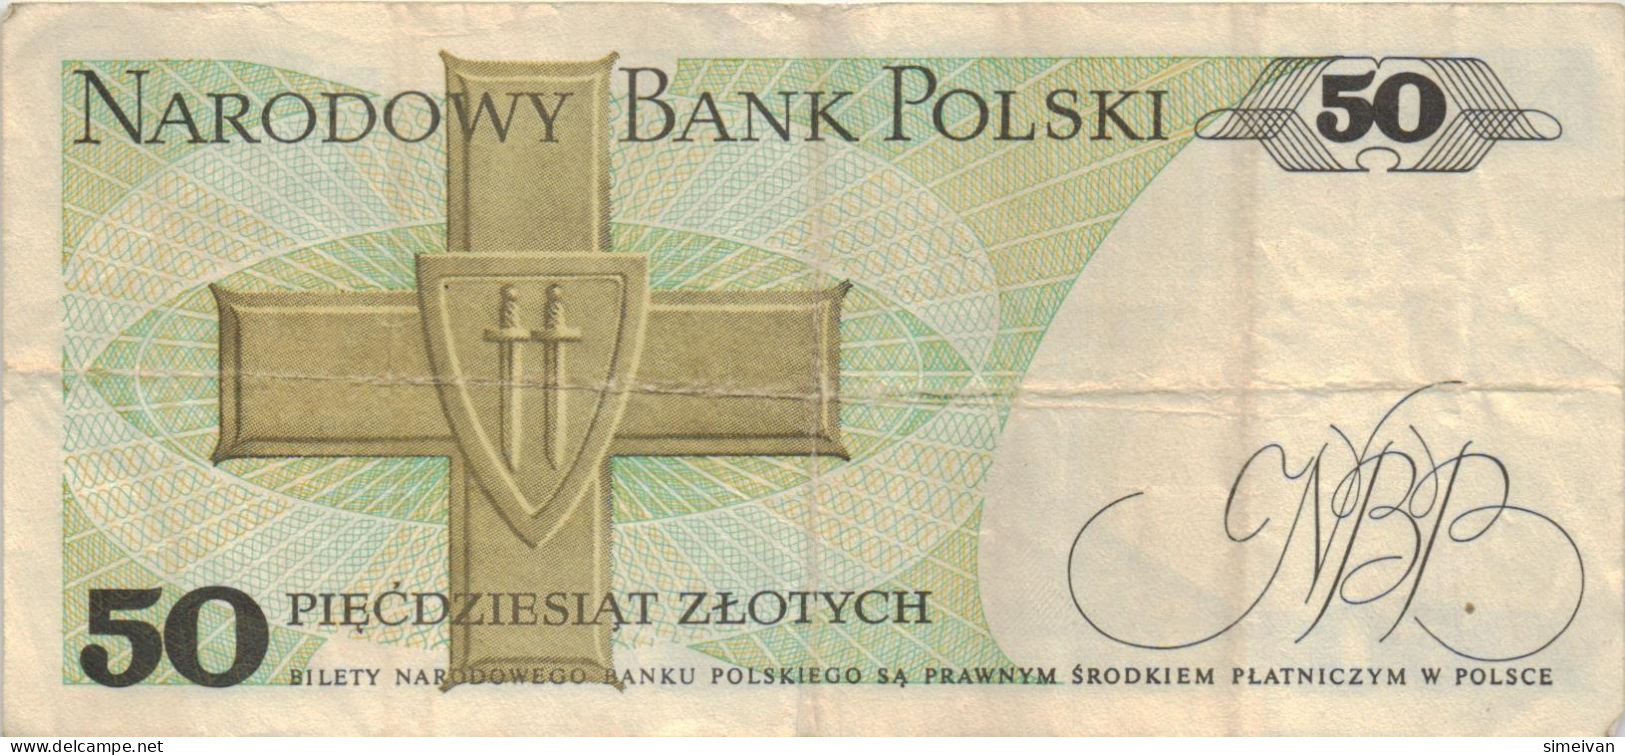 Poland 50 Zlotych 1988 P-142c Banknote Europe Currency Pologne Polen #5296 - Pologne